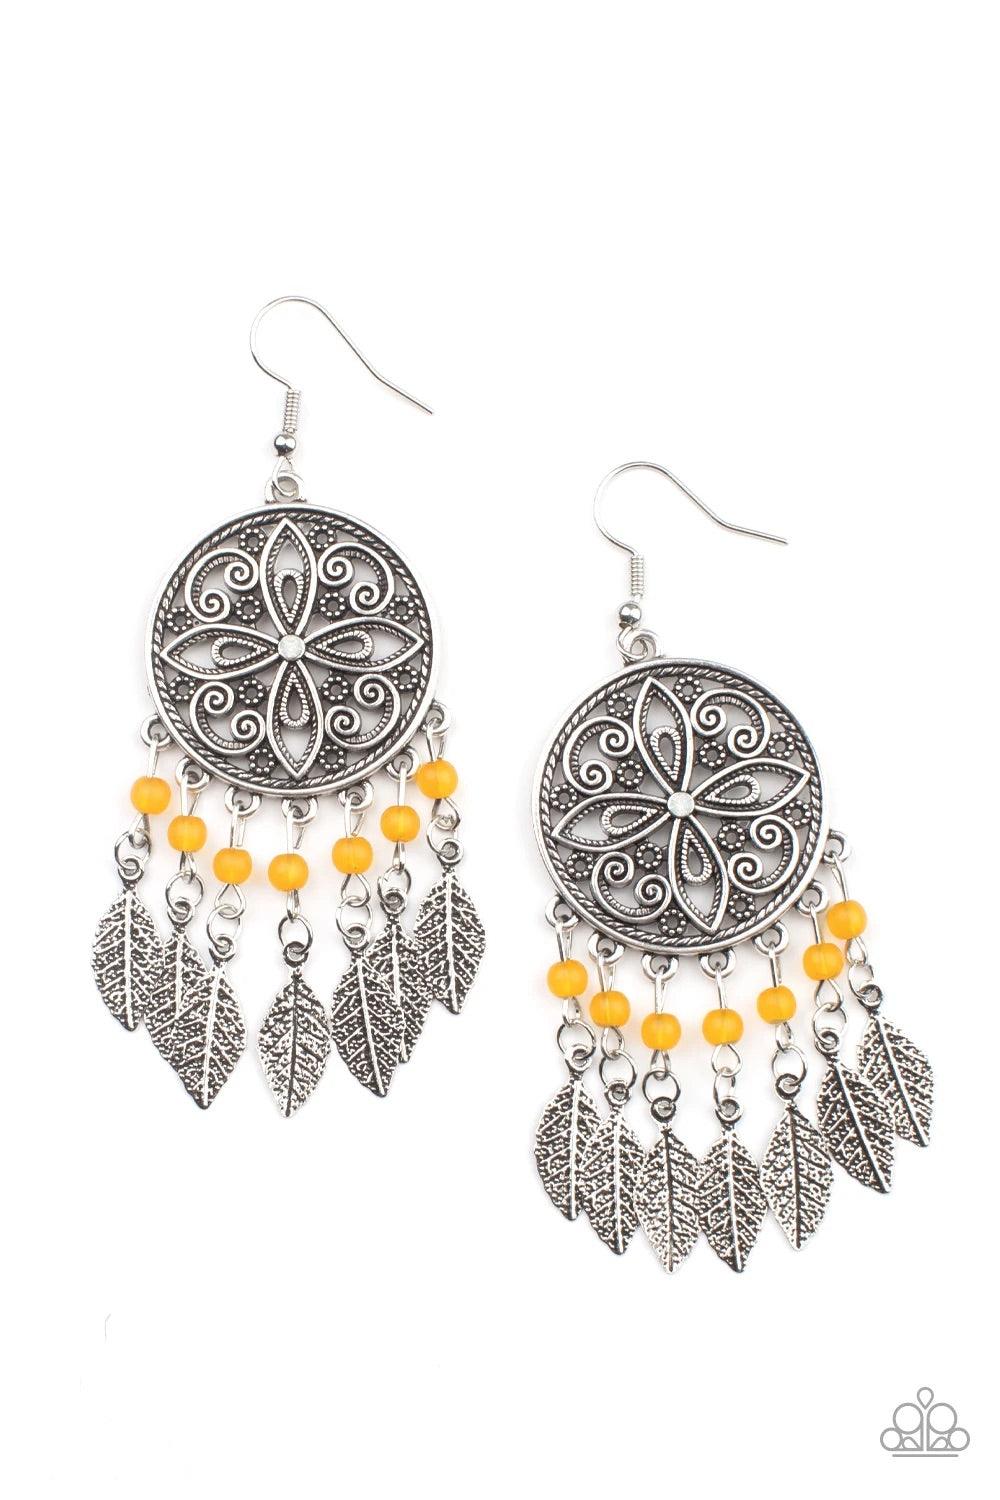 Paparazzi Accessories Free-Spirited Fashionista - Orange Dotted with a dainty iridescent rhinestone center, a mandala patterned silver frame gives way to a fringe of opaque orange beads and antiqued silver feathers, creating a whimsy centerpiece. Earring